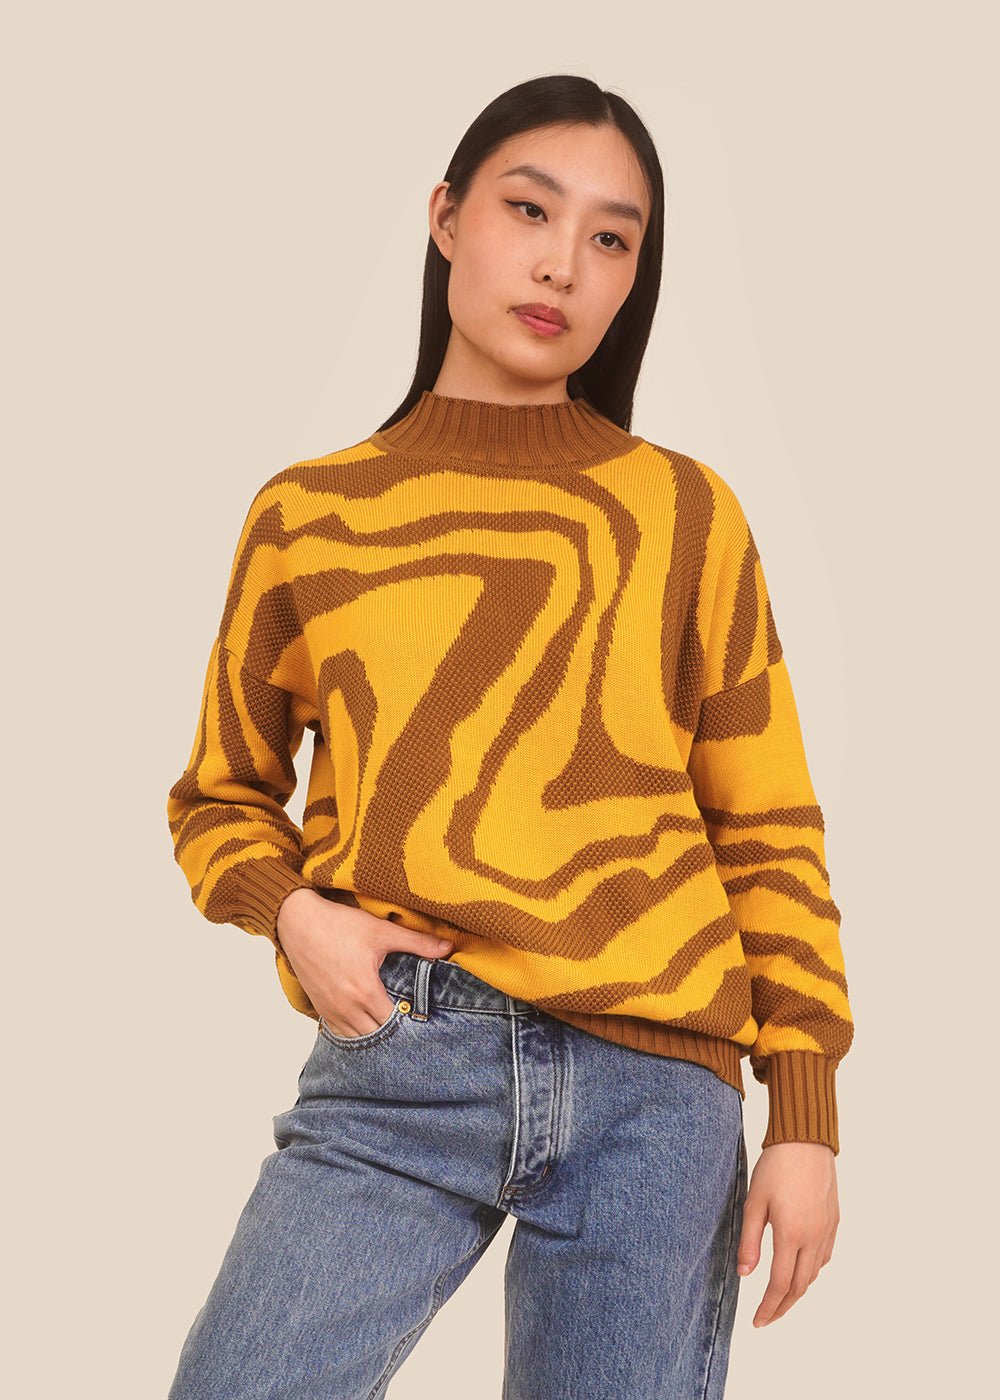 Grön Kulle Dipped Banana Lily Sweater - New Classics Studios Sustainable Ethical Fashion Canada